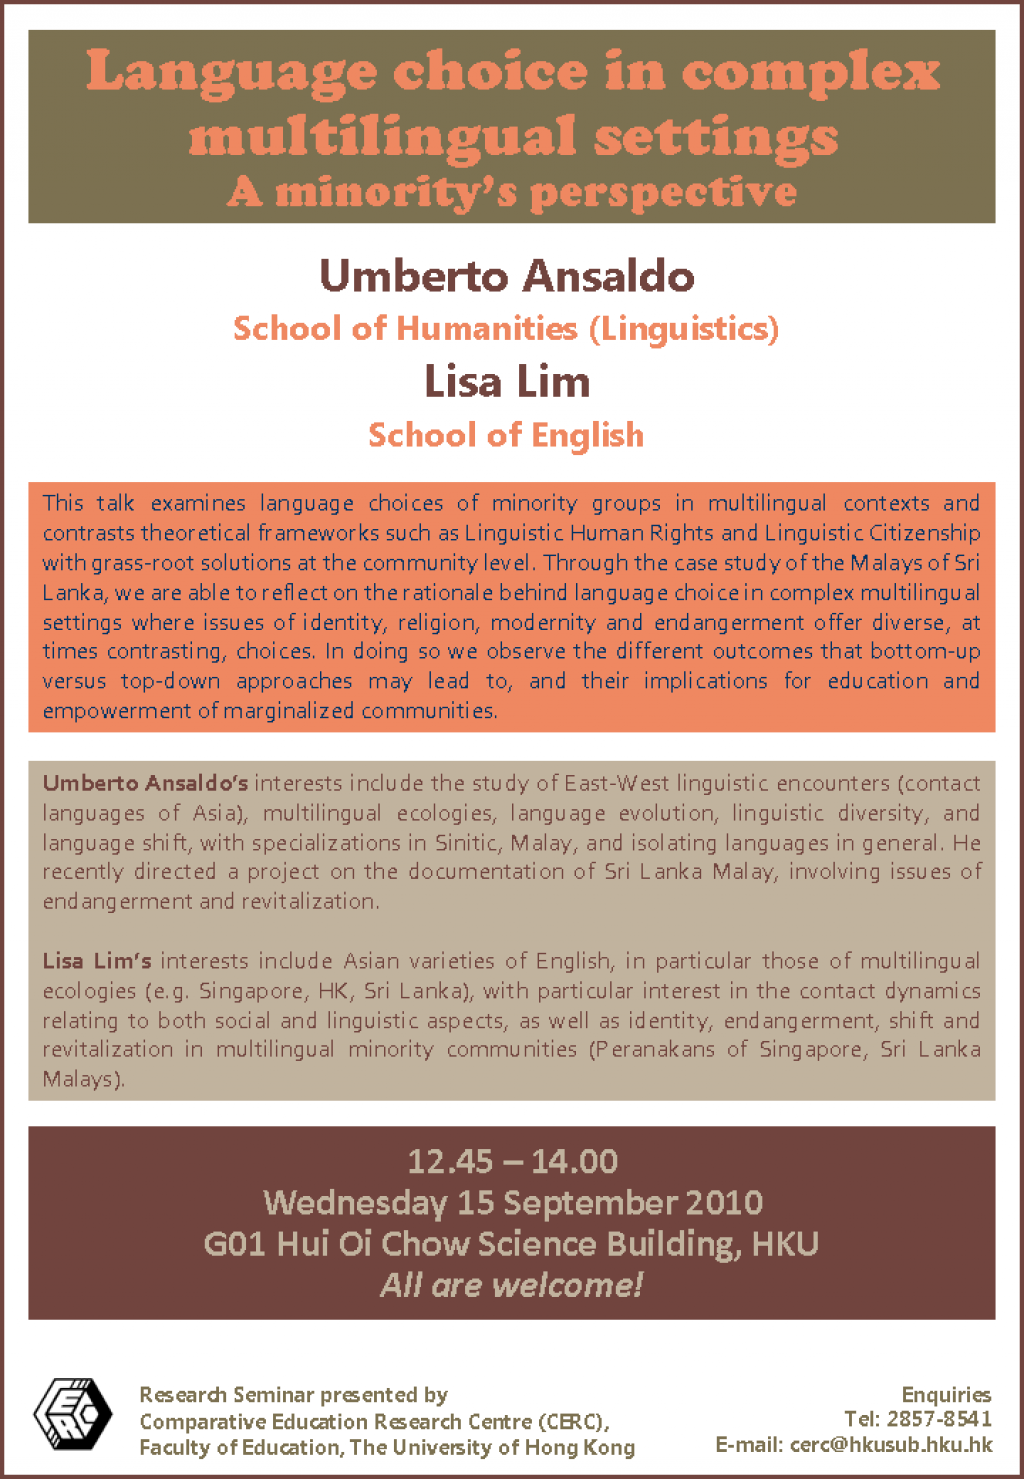 Seminar - Language choice in complex multilingual settings: A minority's perspective